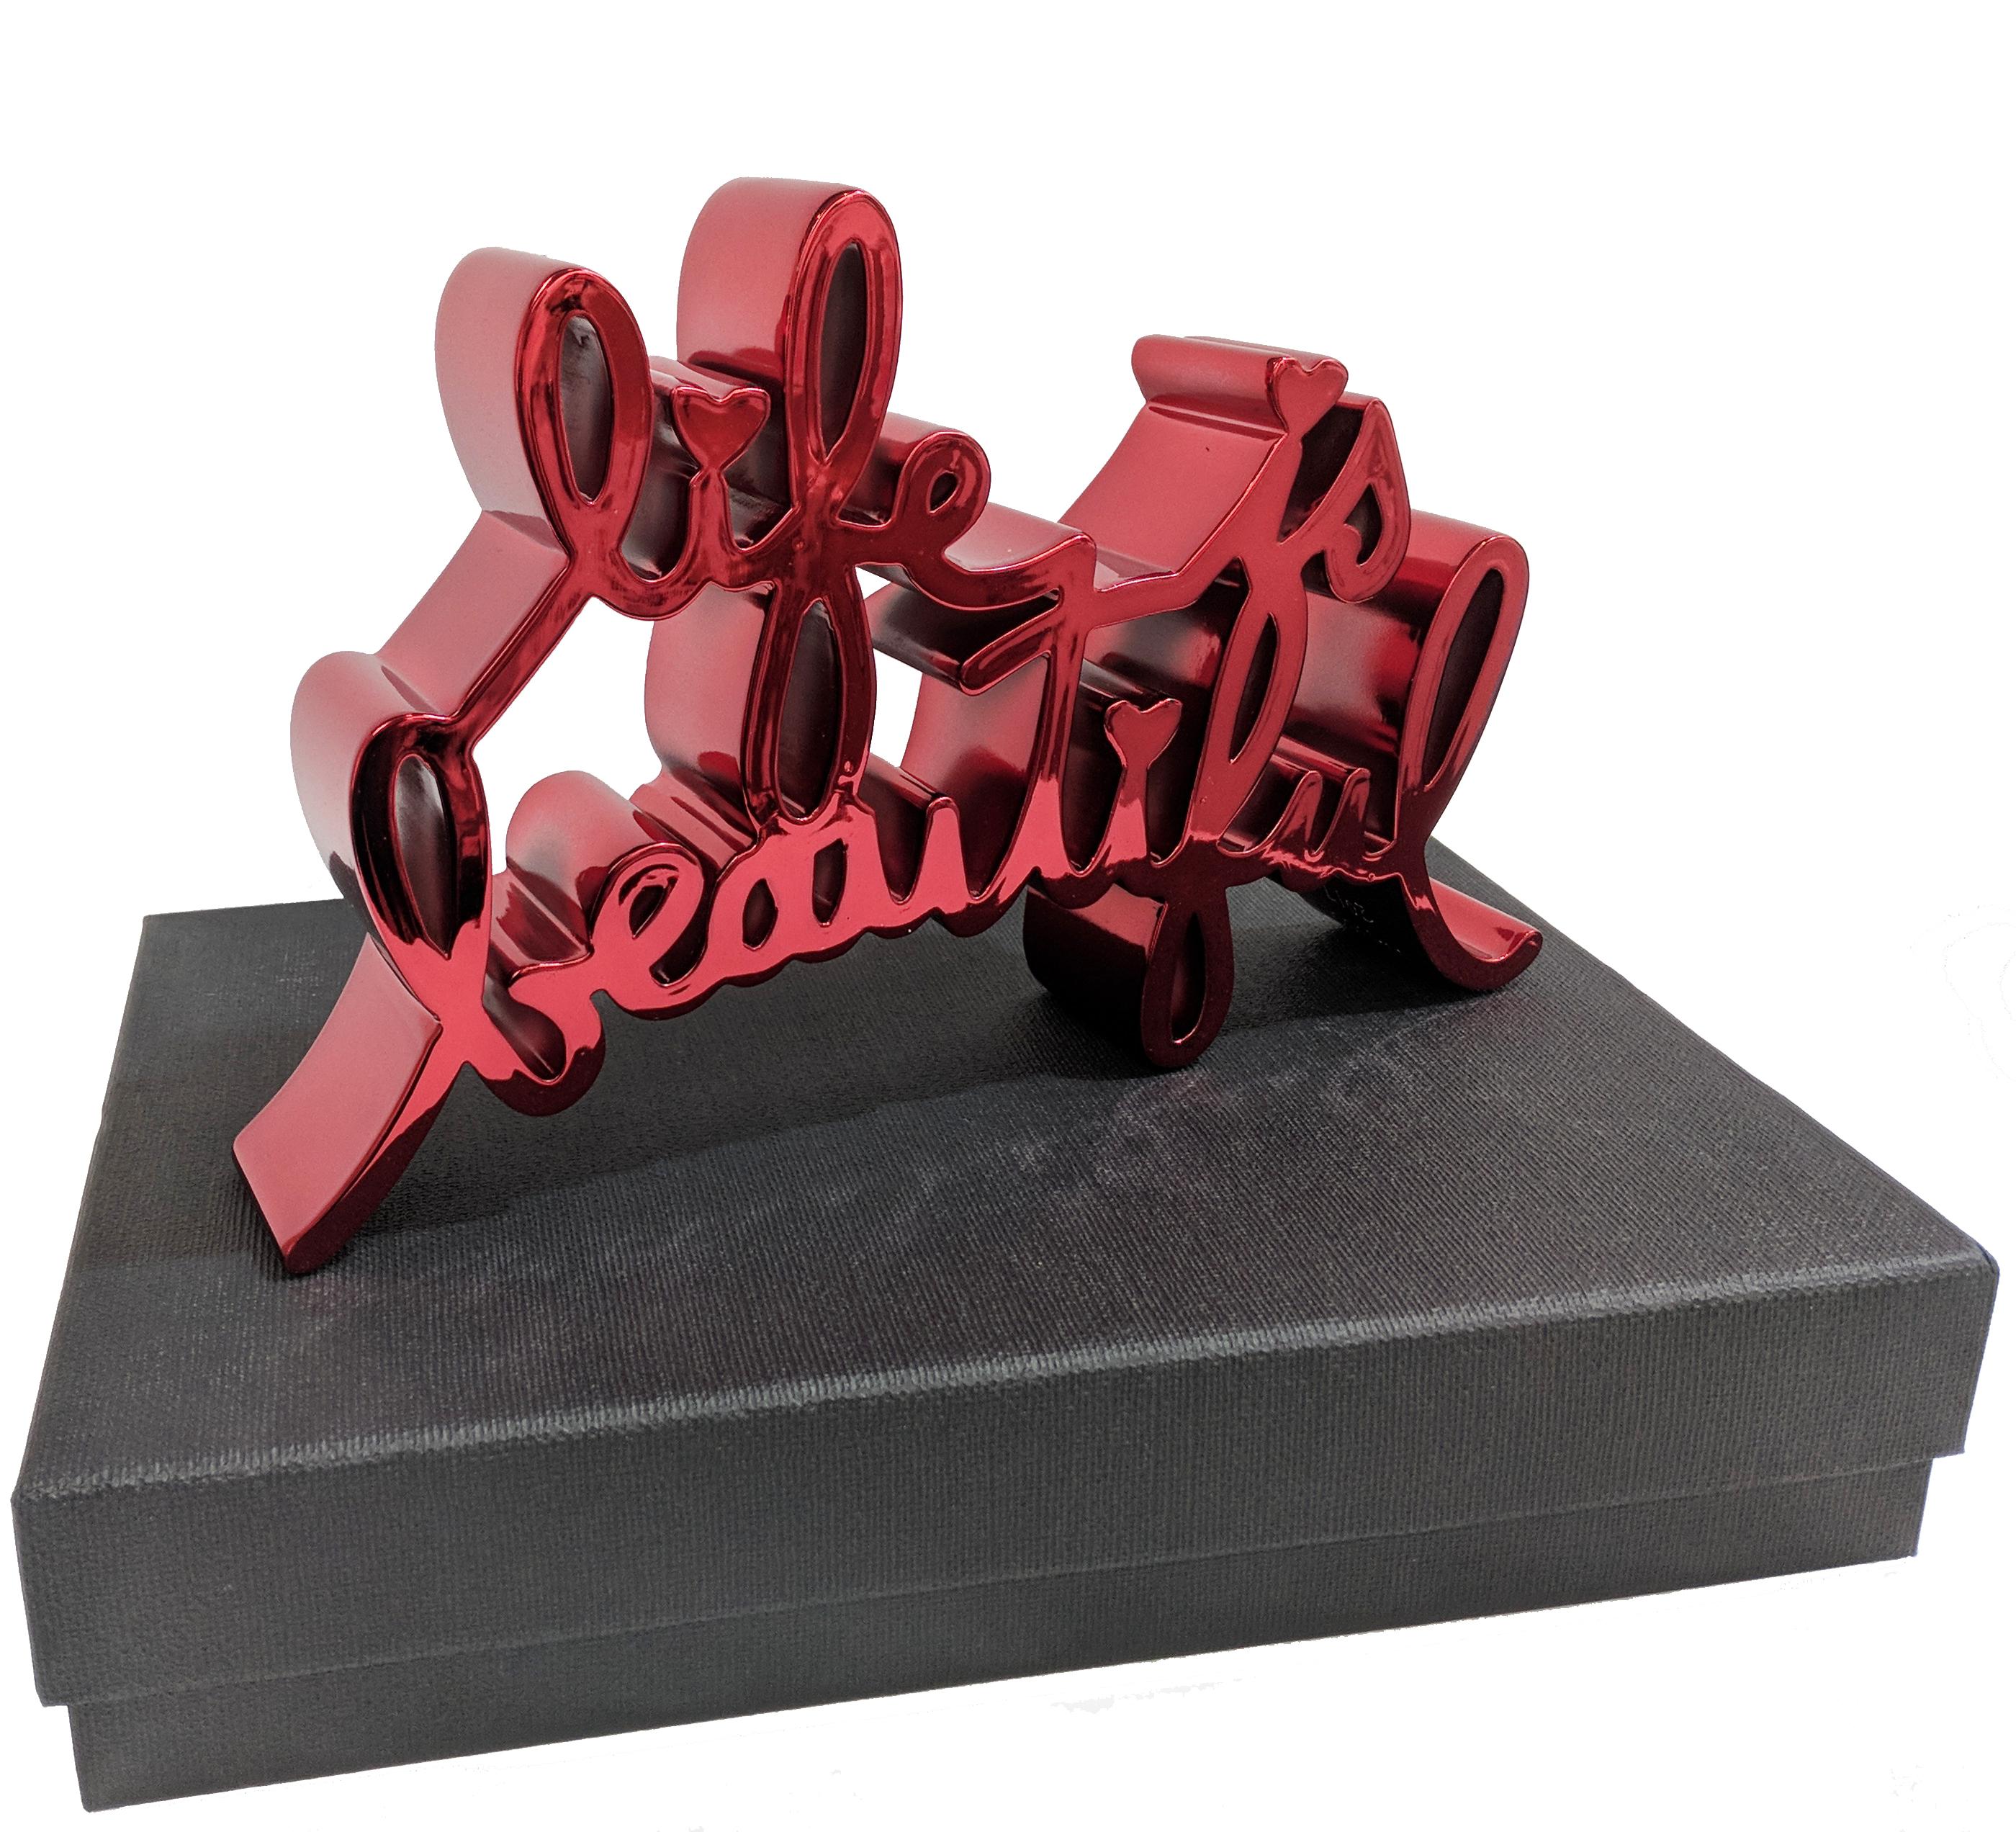 Mr Brainwash Abstract Sculpture - LIFE IS BEAUTIFUL (HARD CANDY RED)